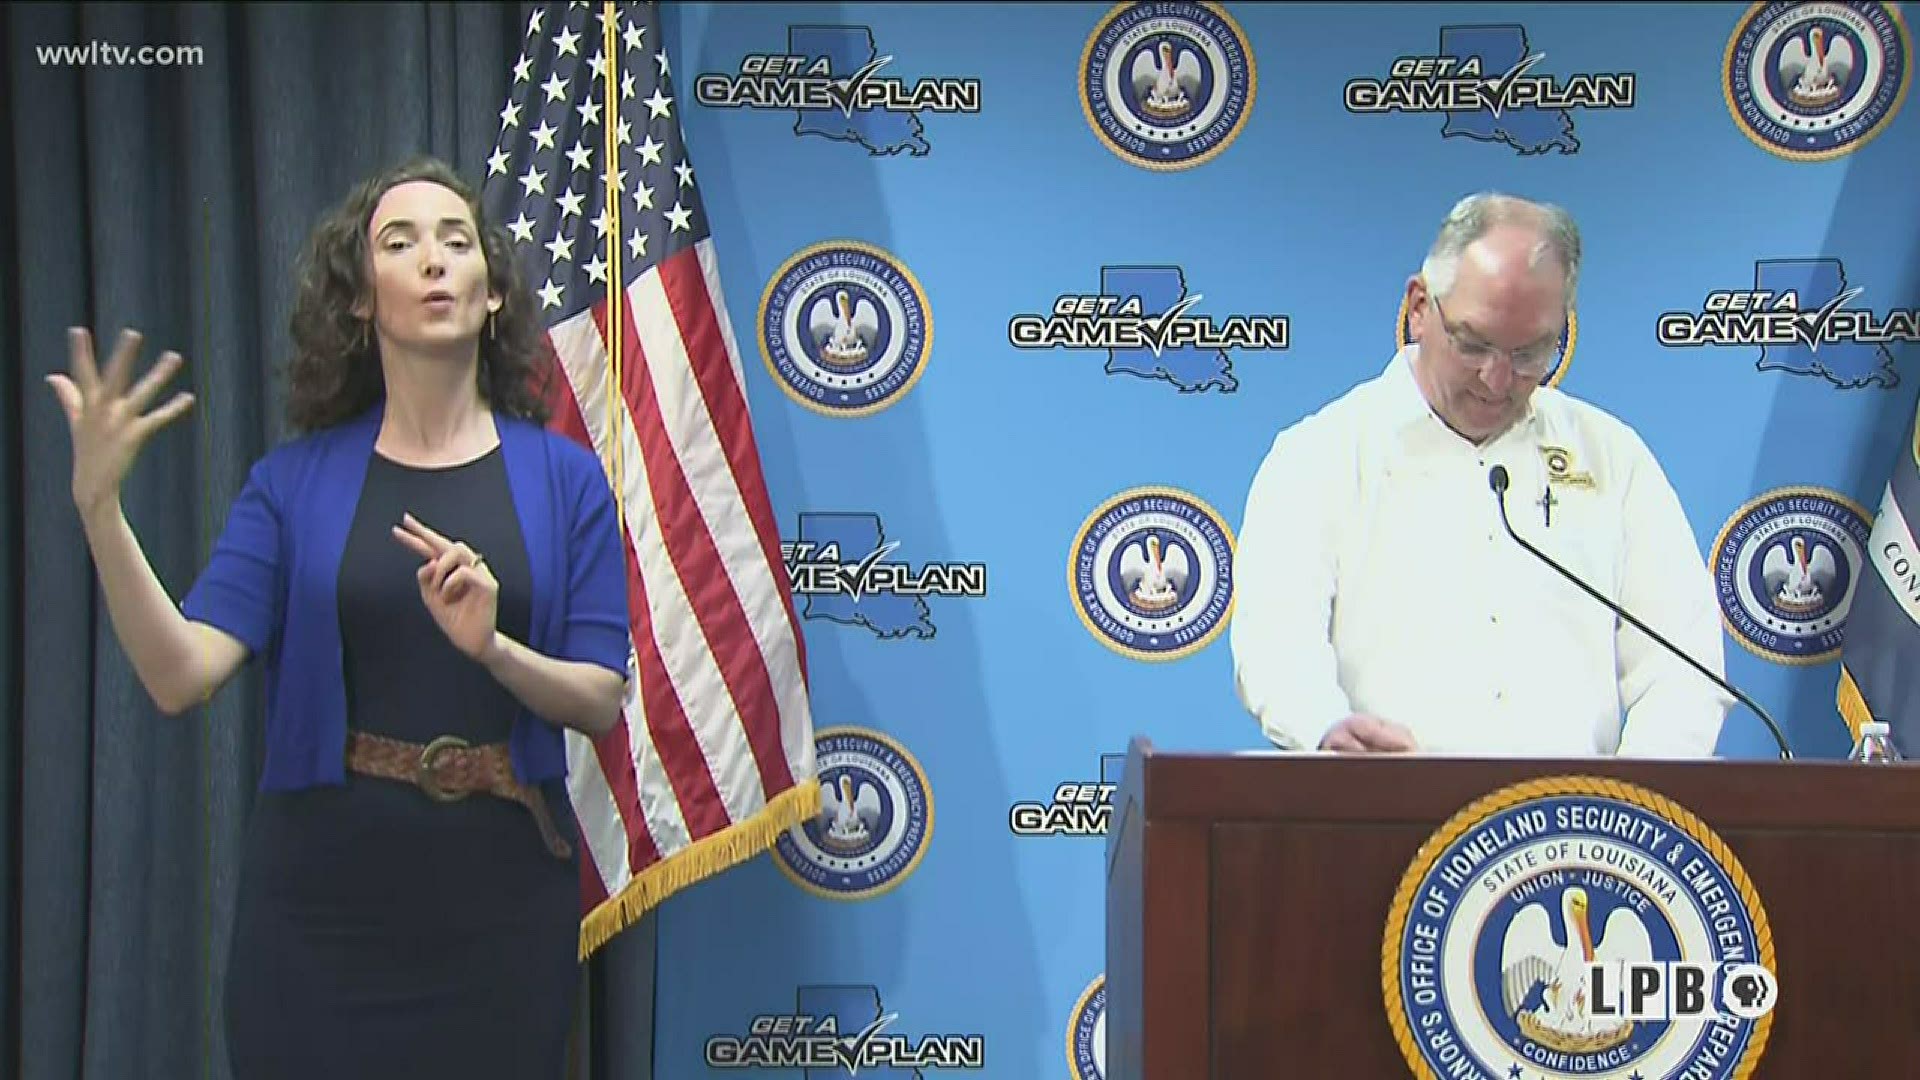 Governor John Bel Edwards said that he is extending the Stay at Home mandate another two weeks and hopes to begin Phase 1 at that time.